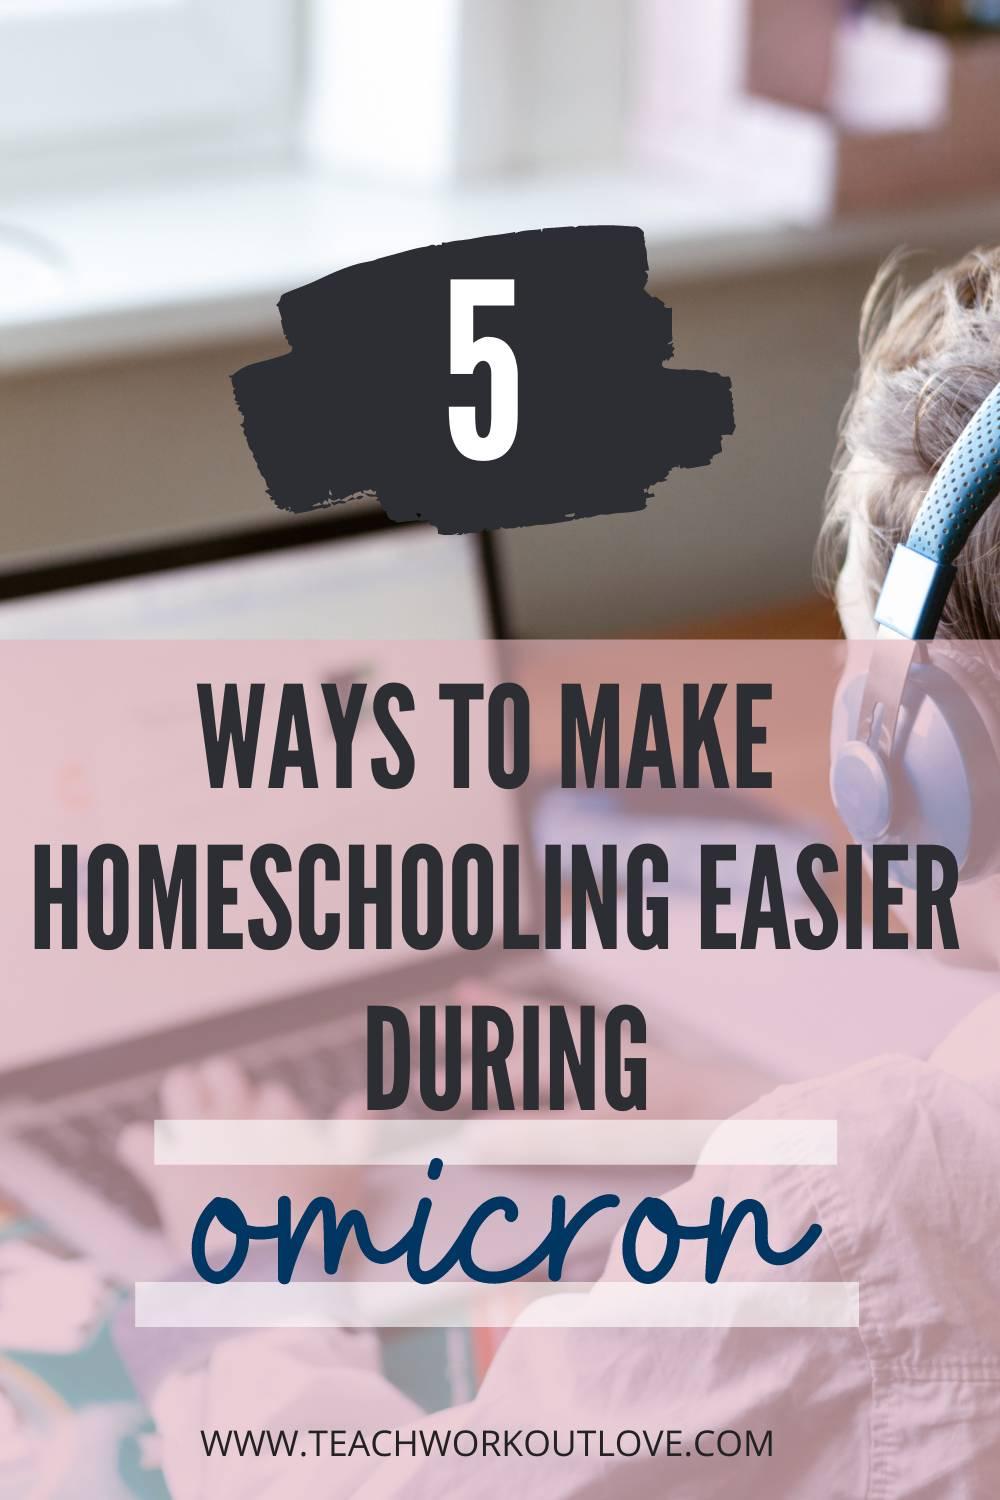 While many parents began to homeschool because they had no option, many continue to do so. Yet teaching your children yourself isn't easy. Still, there are some methods you can try to make homeschooling easier during the Omicron phase of the pandemic.